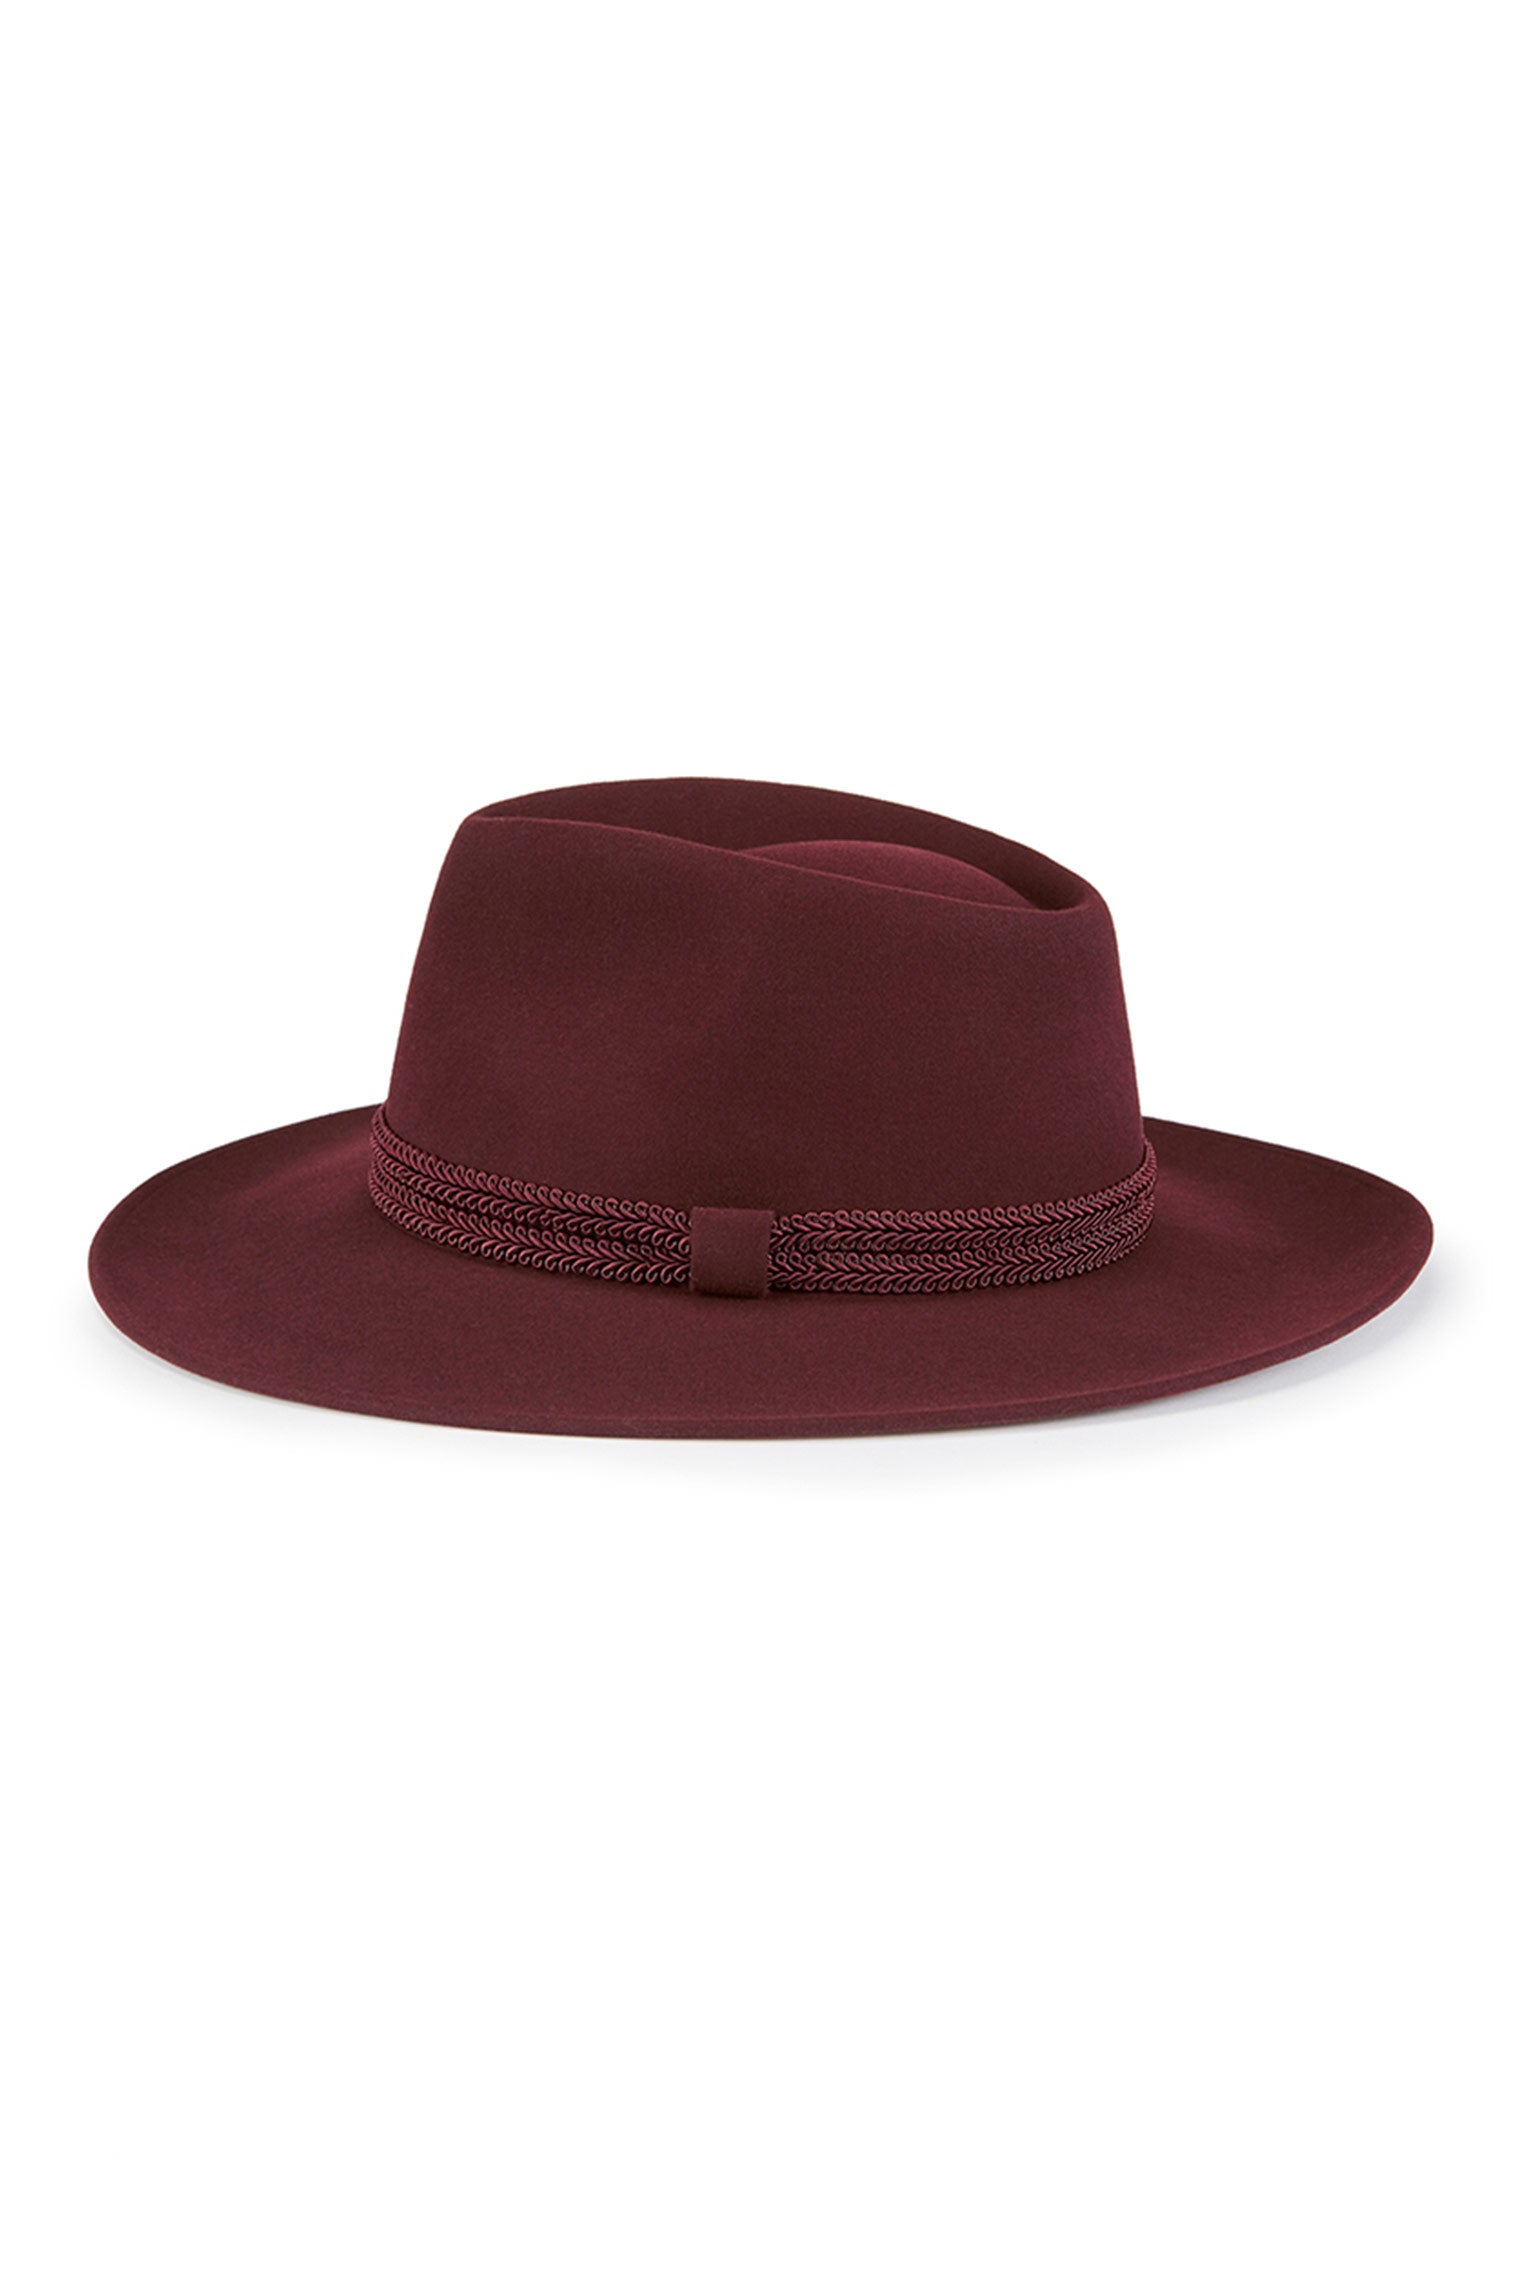 Escorial Wool Meredith Fedora - Hats for Tall People - Lock & Co. Hatters London UK